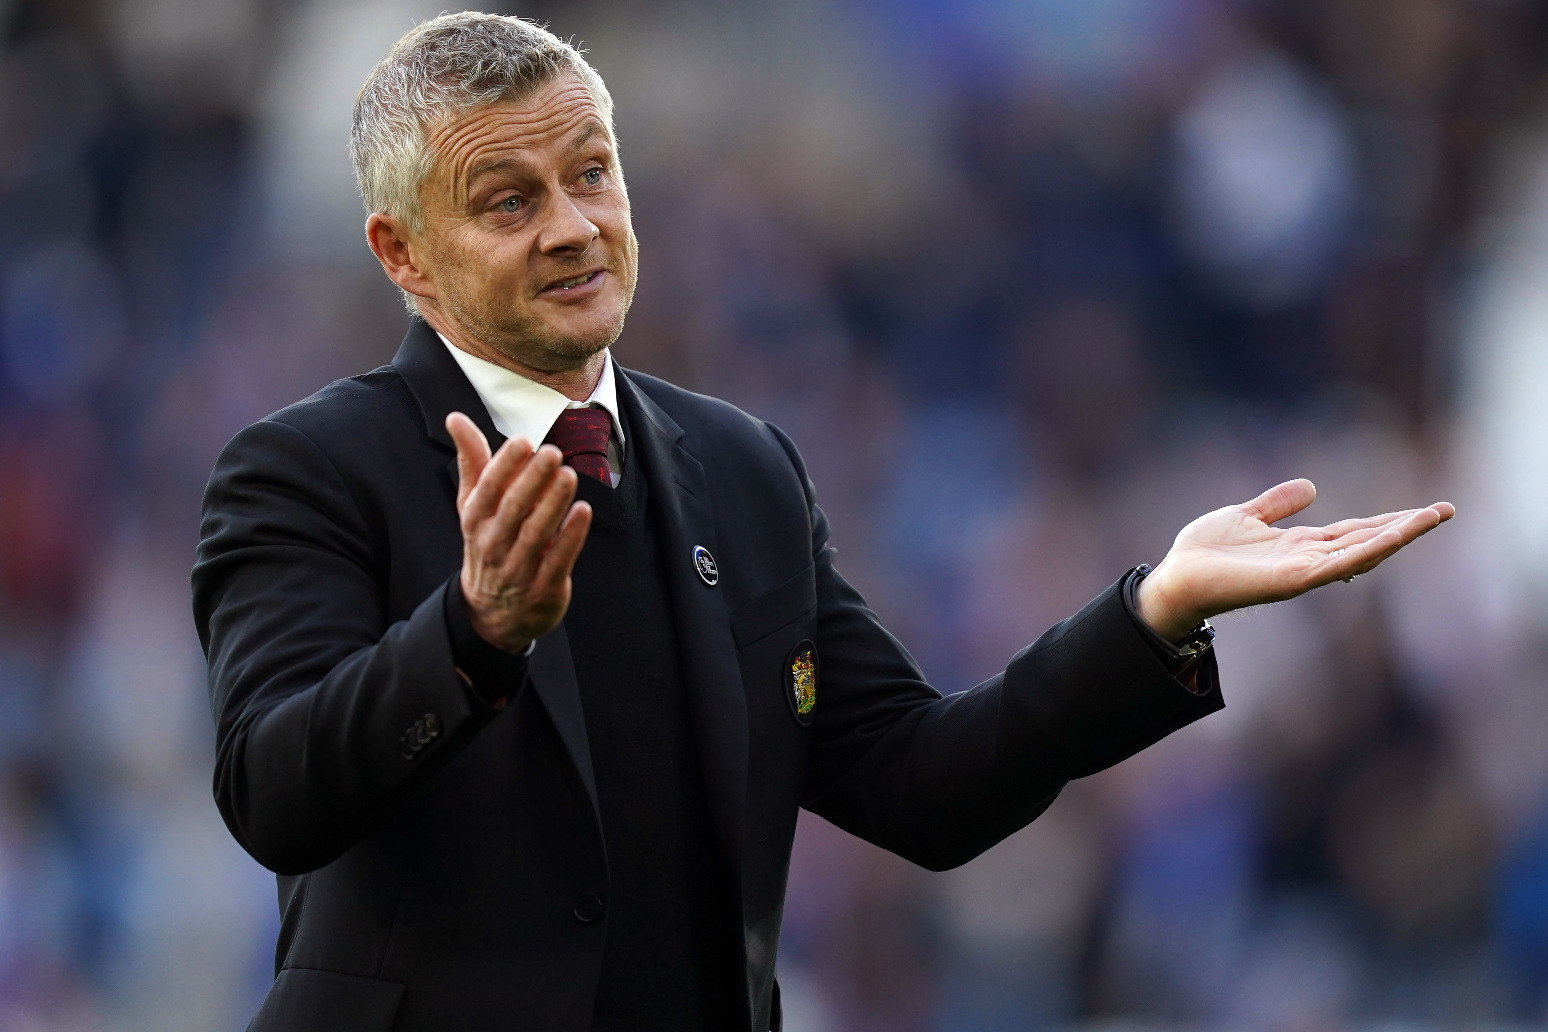 No Manchester United player is guaranteed a place, warns Ole Gunnar Solskjaer 